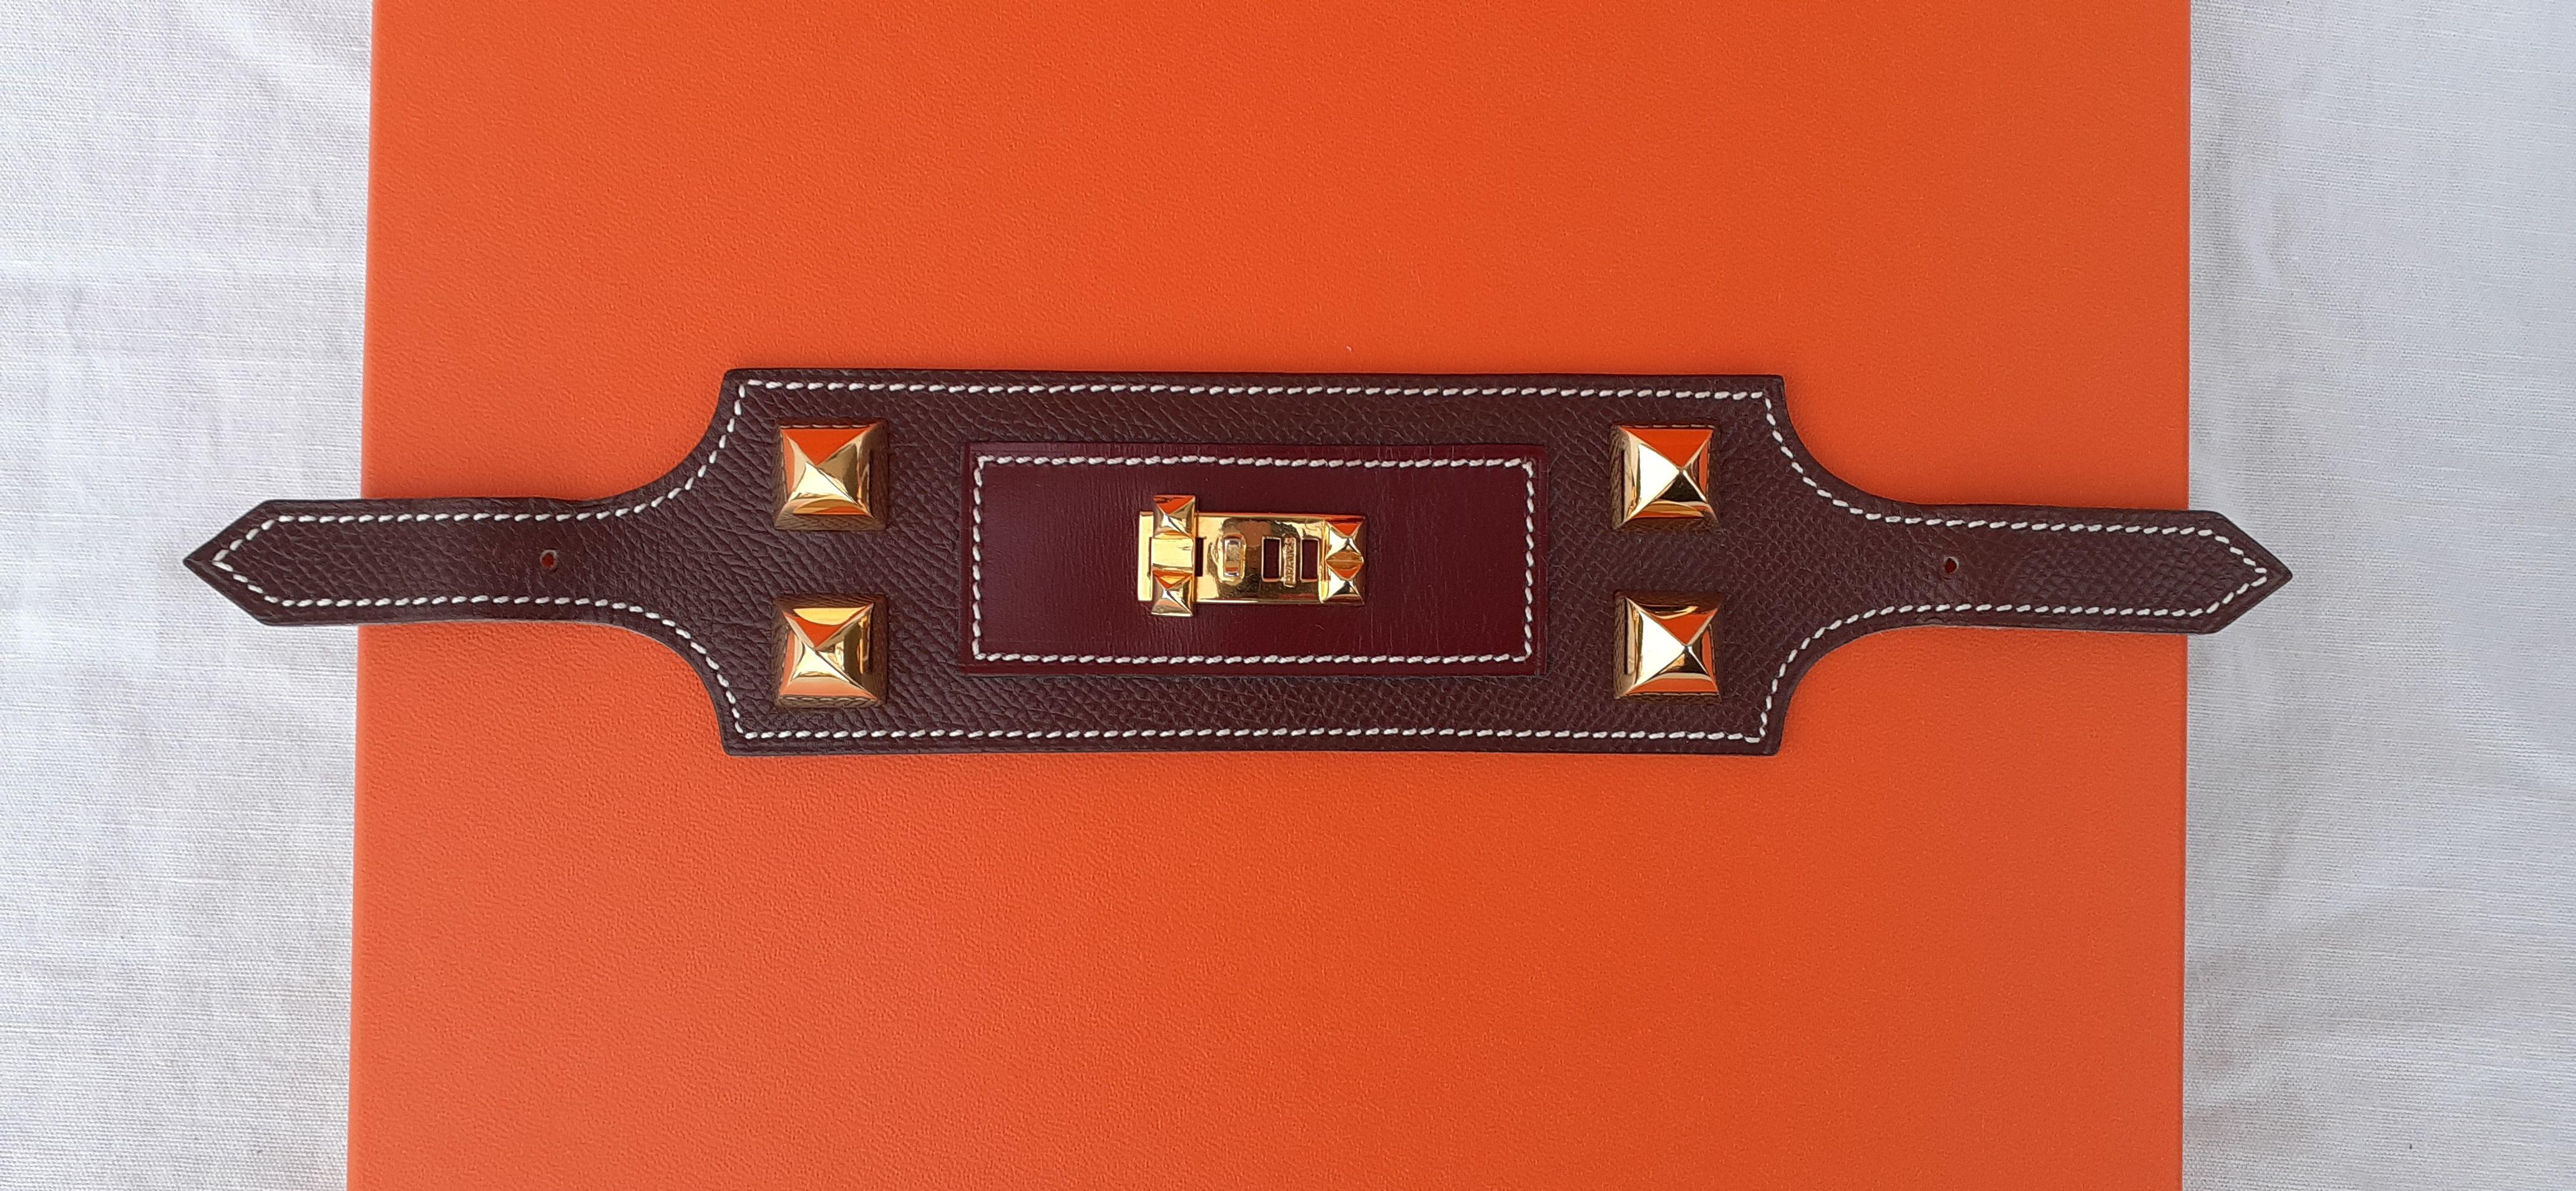 Absolutely Gorgeous Authentic Hermès Ornament

This piece of leather is designed to adorn the Hermès skirts and belts designed for this purpose (not included in sale)

There are 4 so-called 